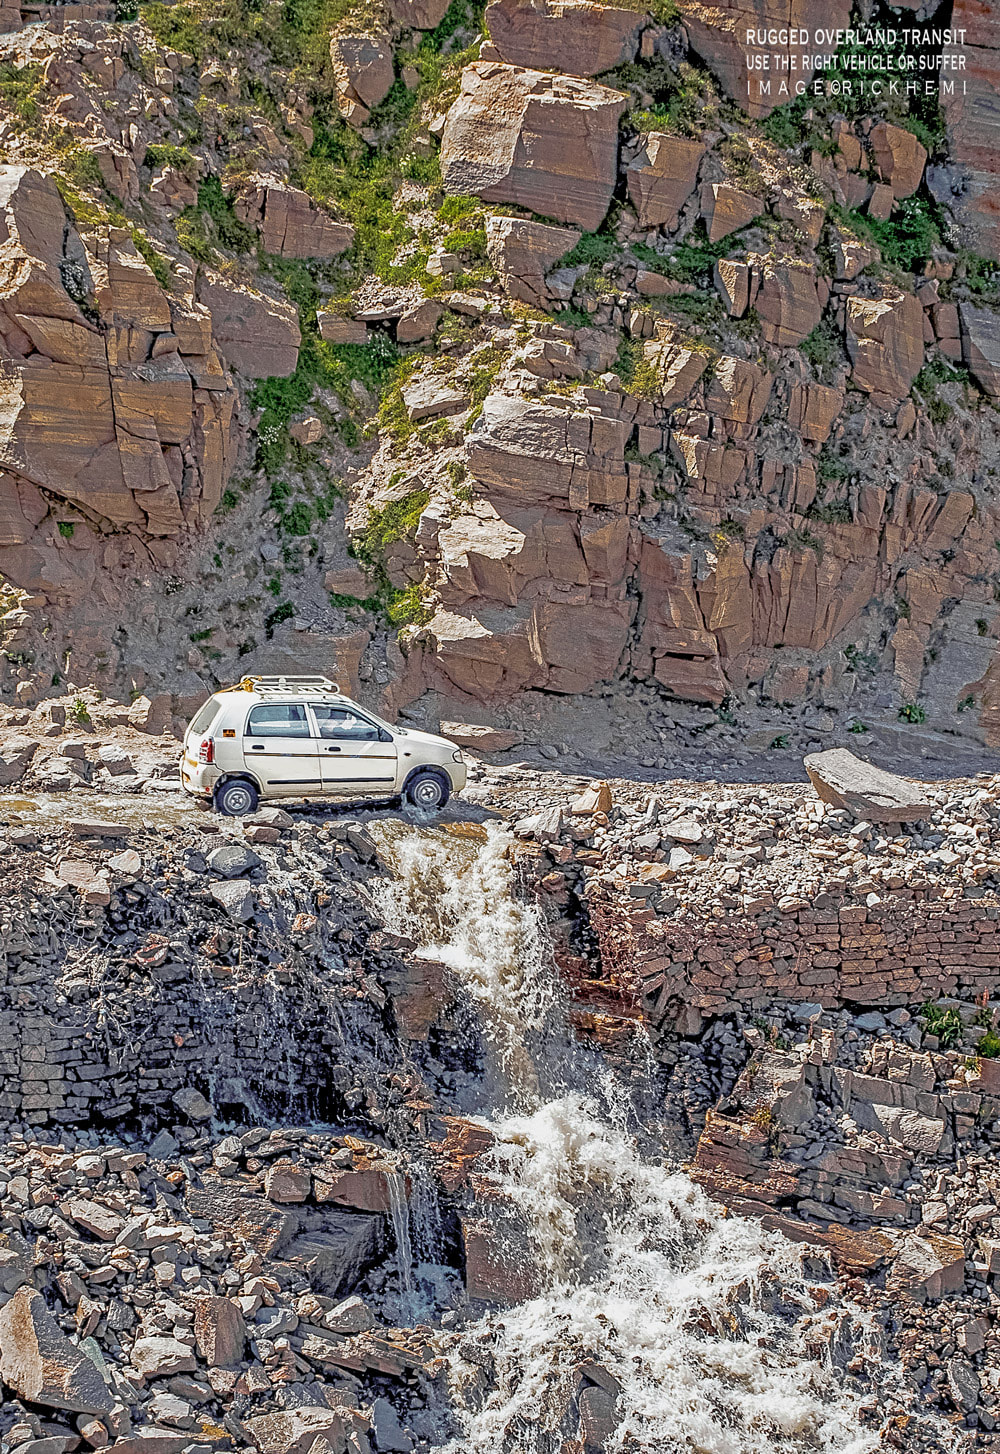 solo overland travel and transit, self driving, rugged dangerous dirt track road routes, washouts, wipeouts, driver error, image by Rick Hemi